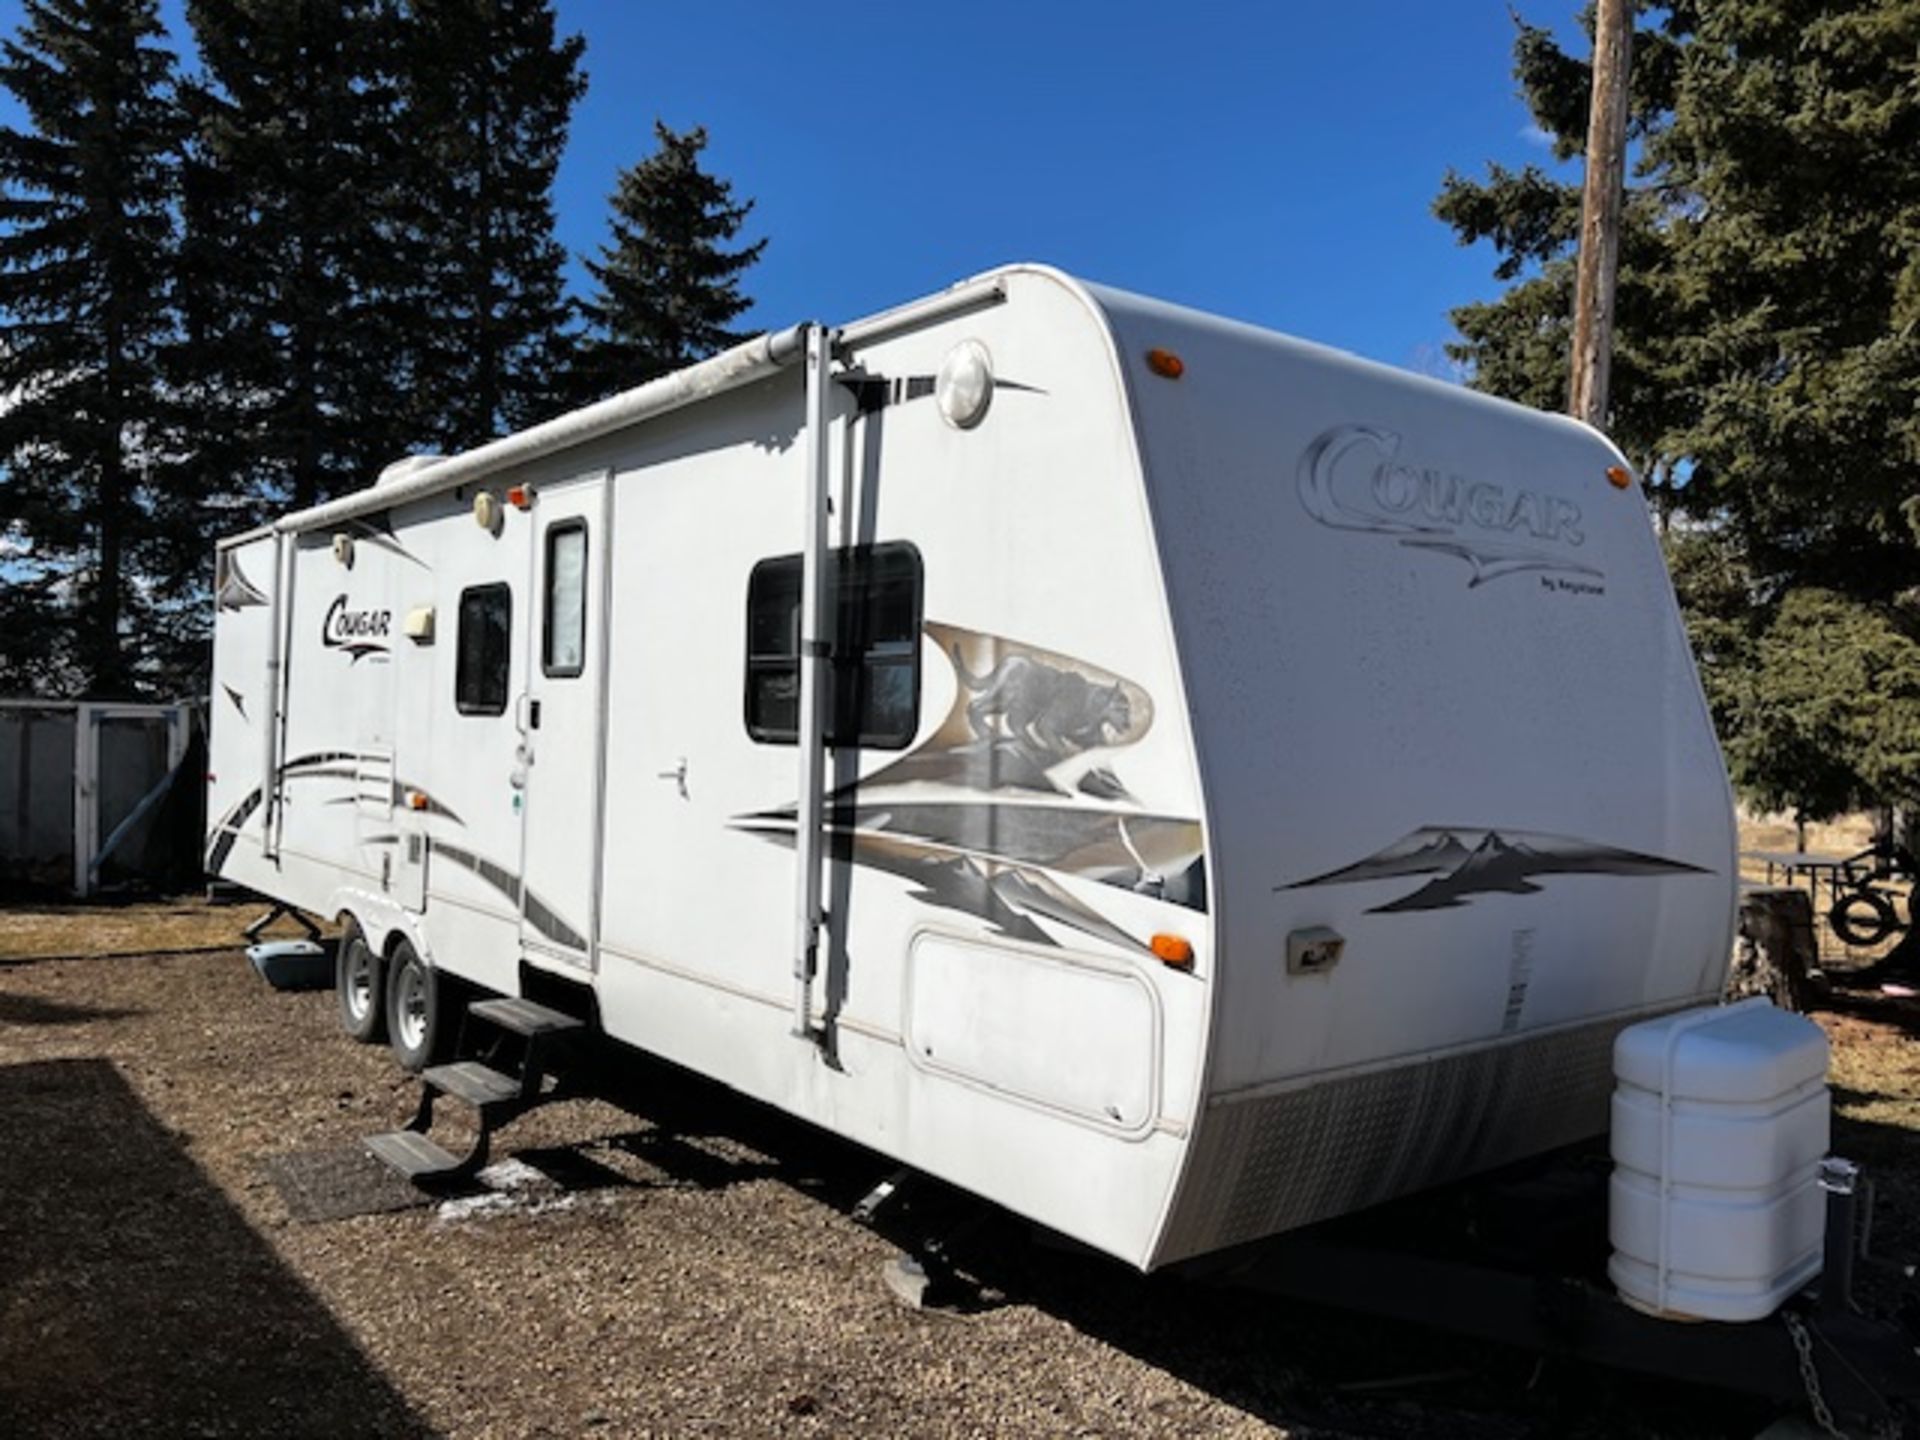 2008 COUGAR 304 VHS 30' TRAVEL TRAILER W/2 S/O, WINTERIZED, S/N: 4YDT304288C507042